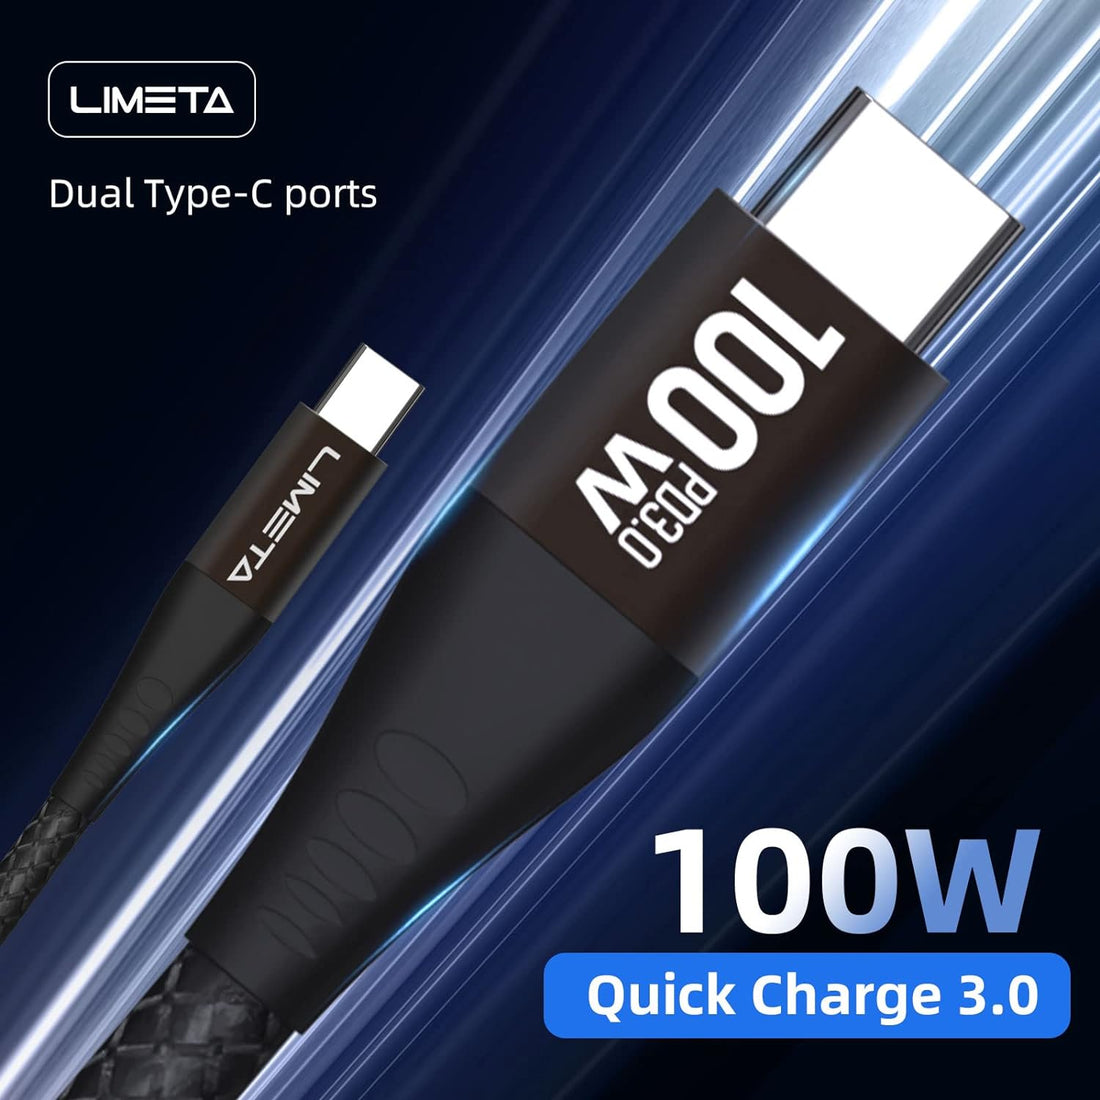 LIMETA 100W USB C Cable USB C to USB C Cable Nylon Type C PD Charging Cable and Data Cable Fast Charging Cable for Samsung Galaxy Ultra Note 20, Pixel 4/3 XL, MacBook Air iPad (2Pack, 1.2m+2m)